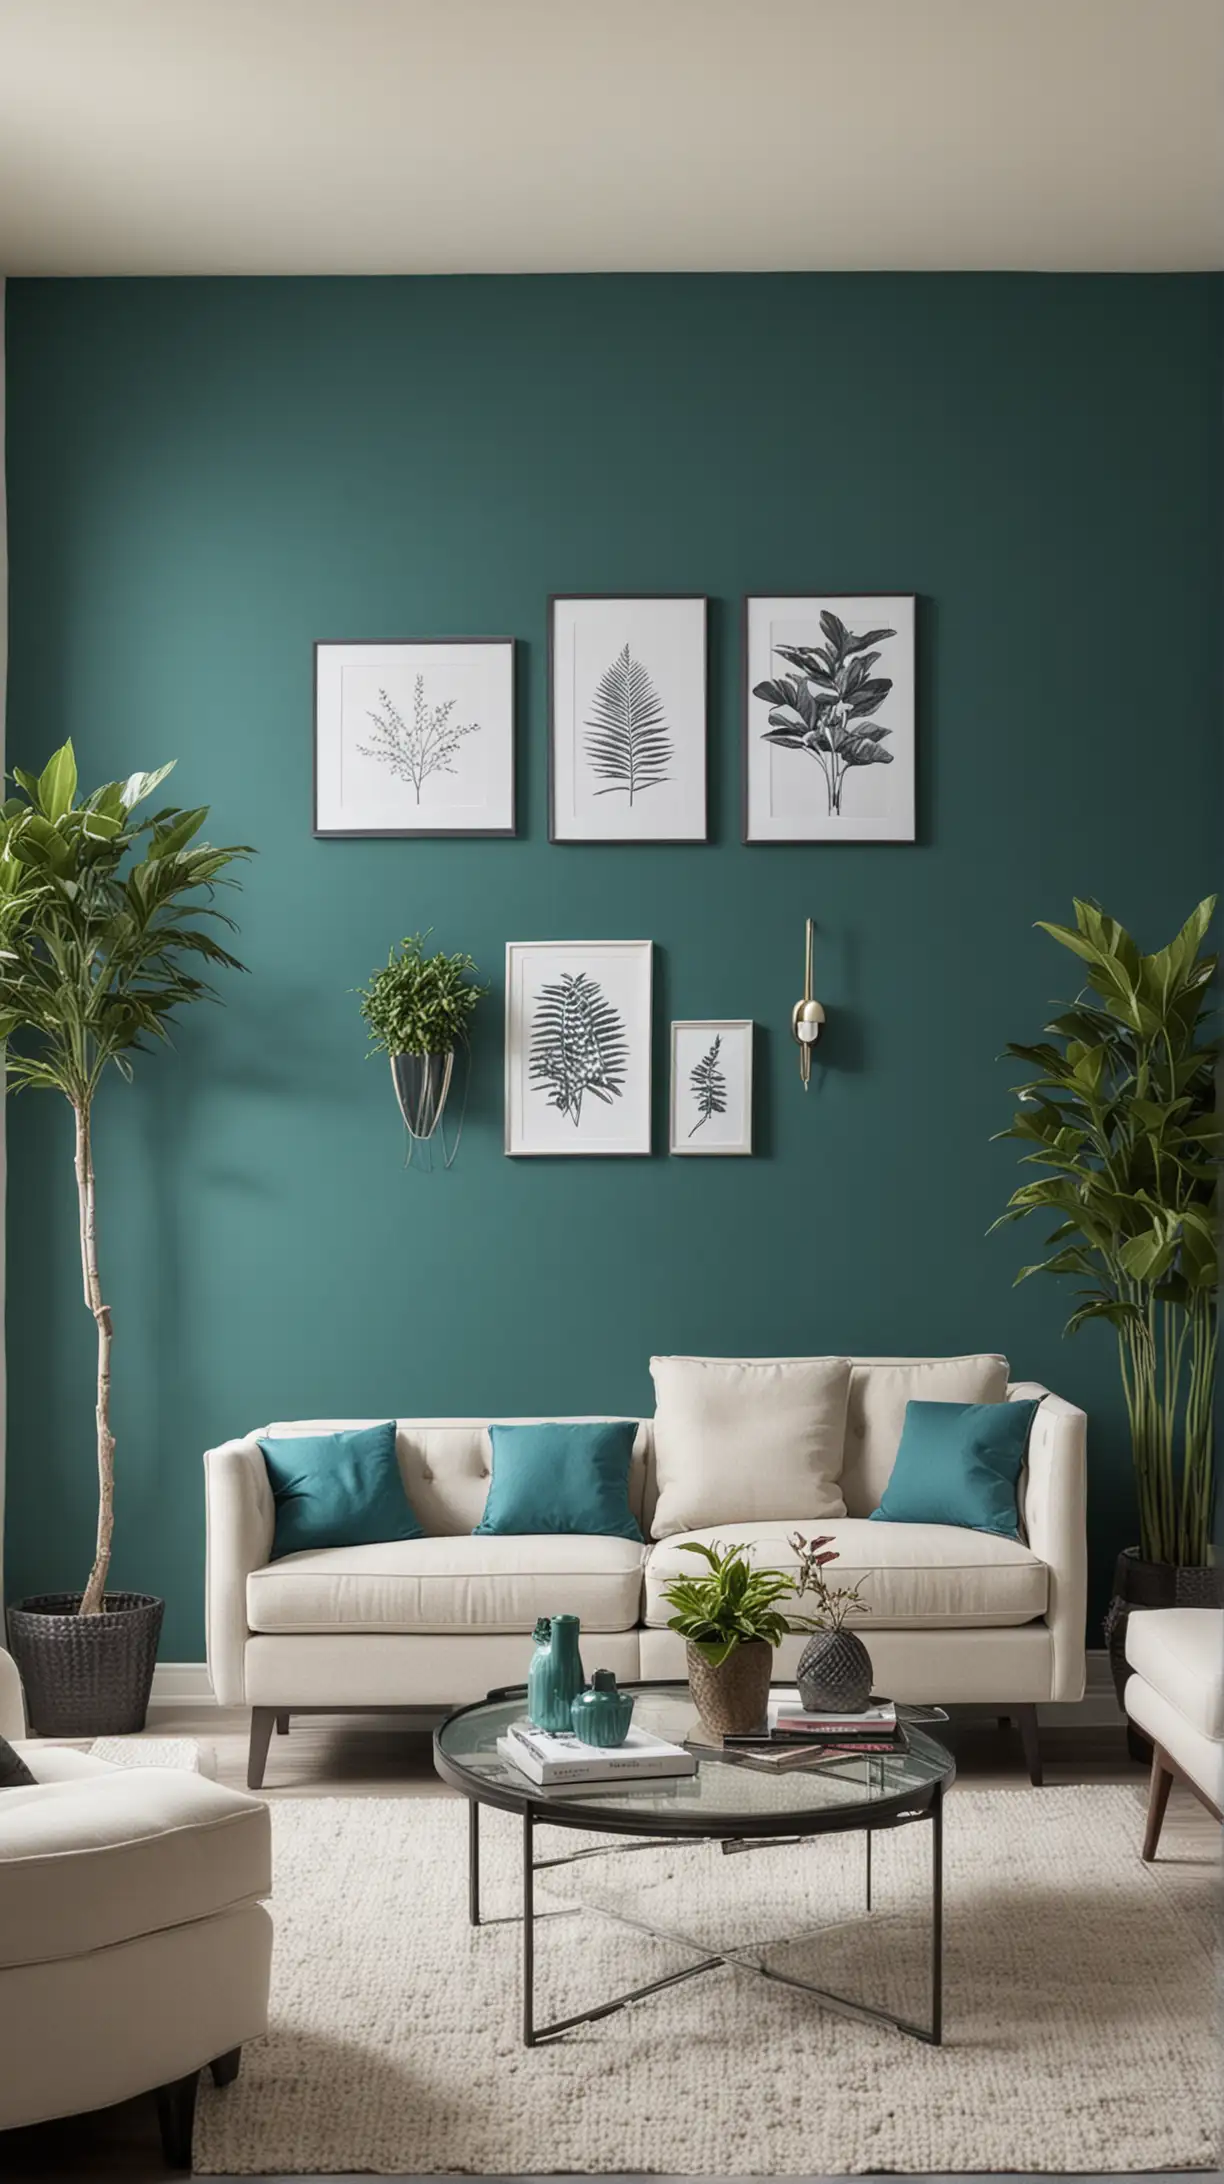 Contemporary Living Room with Bold Teal Accent Wall and Minimalist Decor